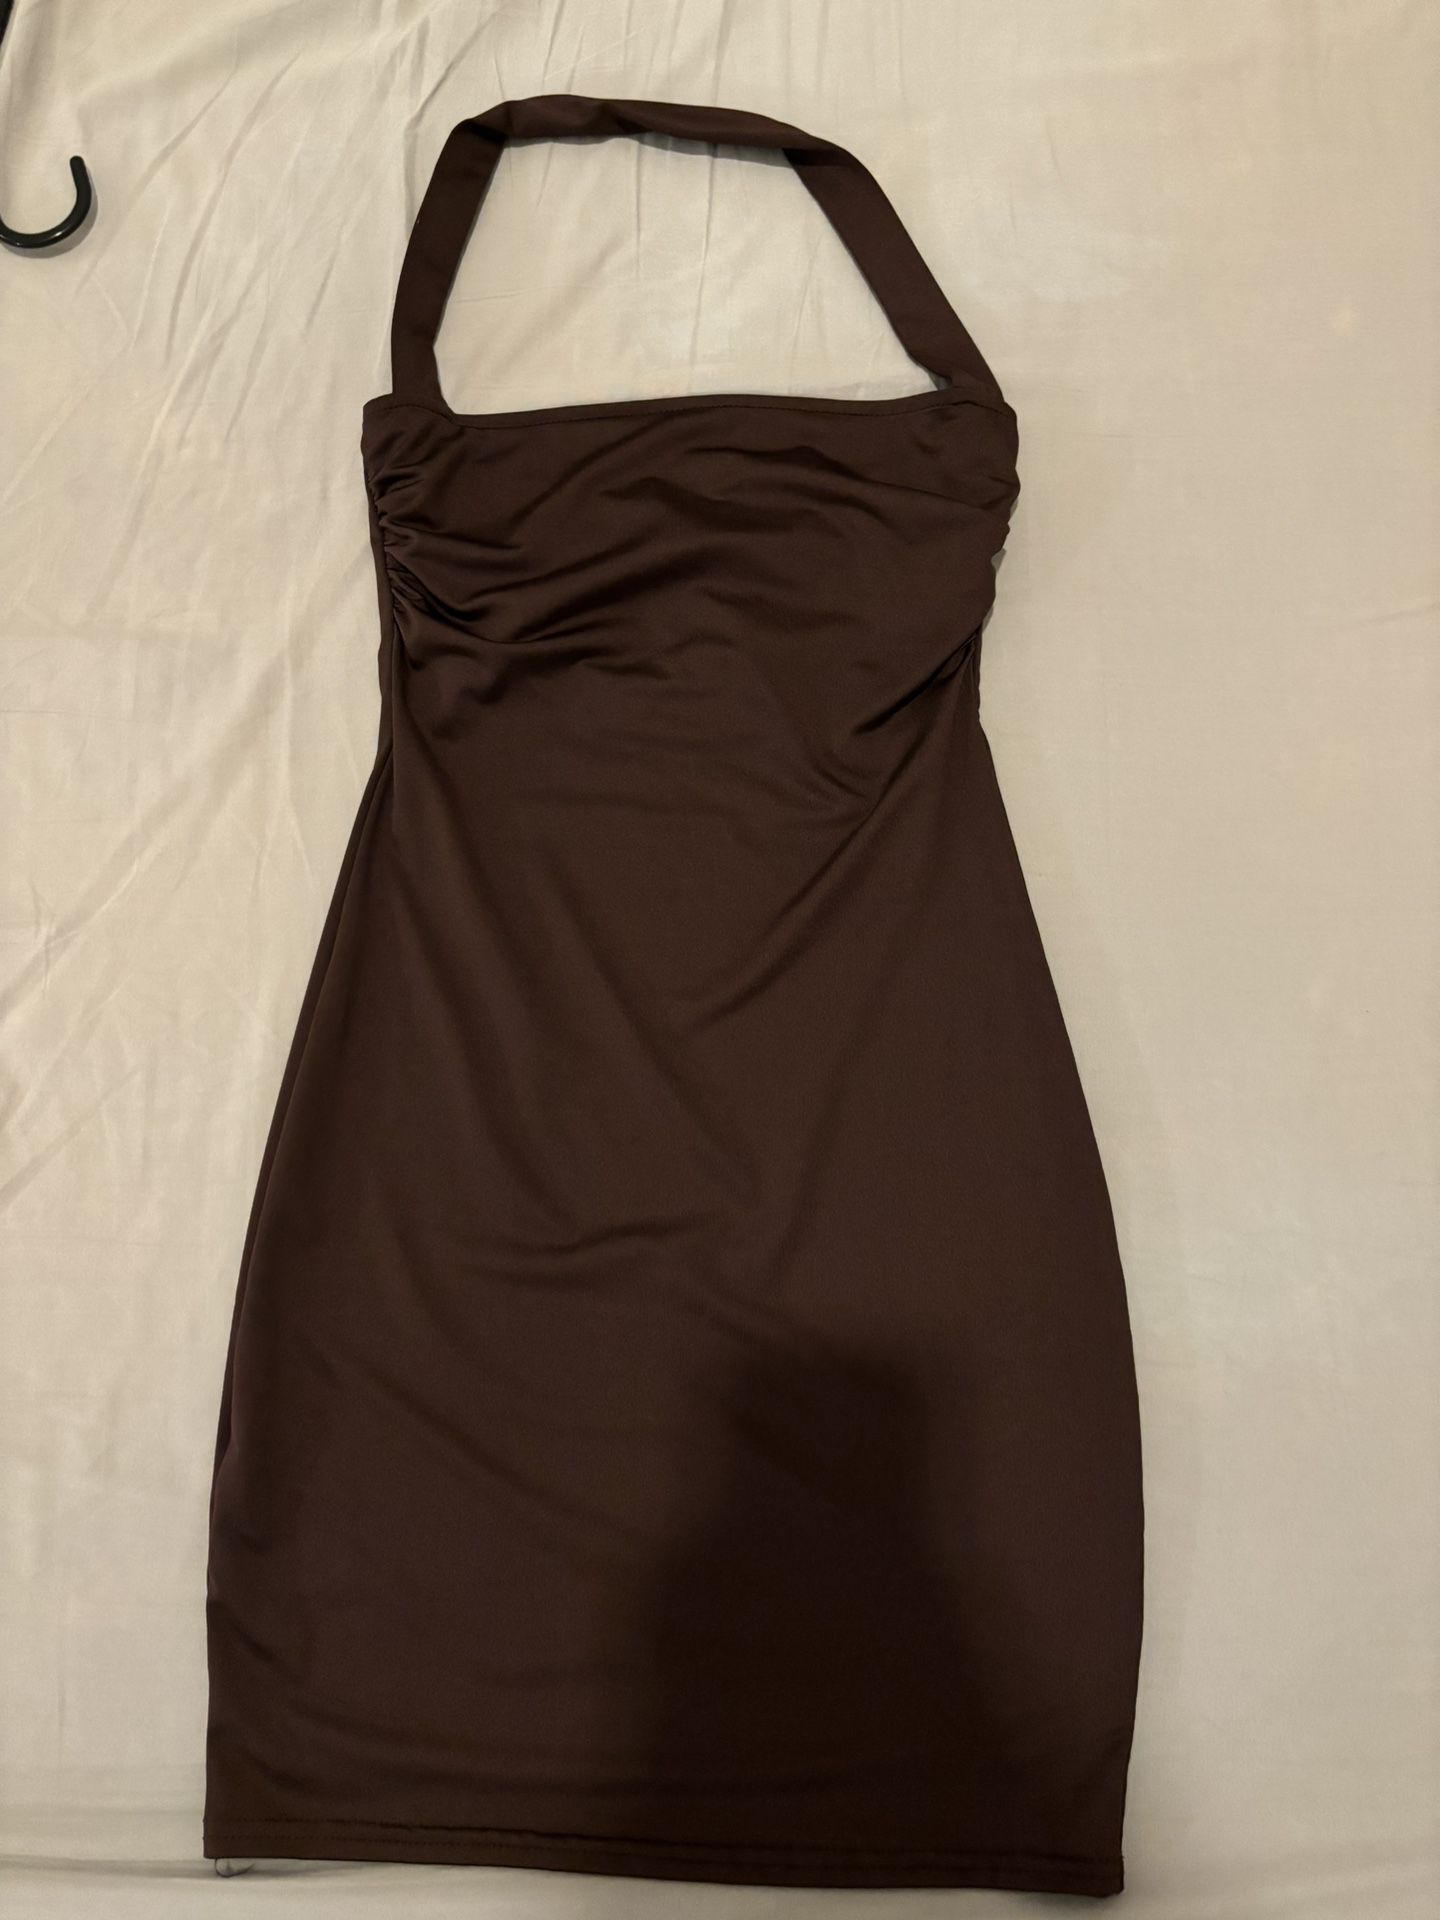 Women Dress Size S, Strapless, Brown, Length Without Stretch Is about 23inches